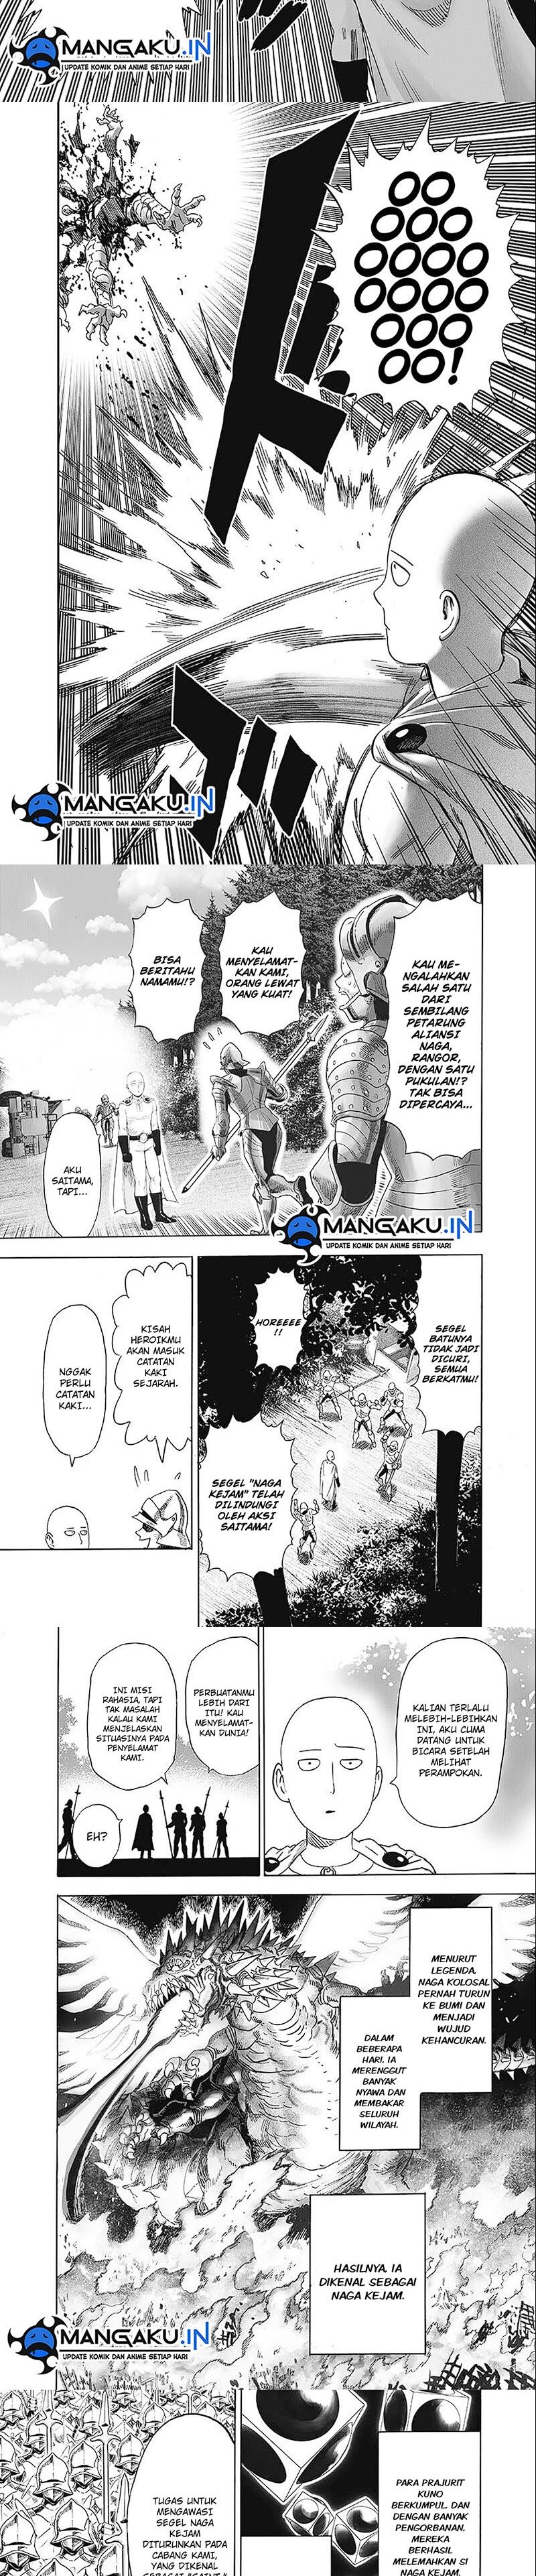 One Punch Man Chapter 243